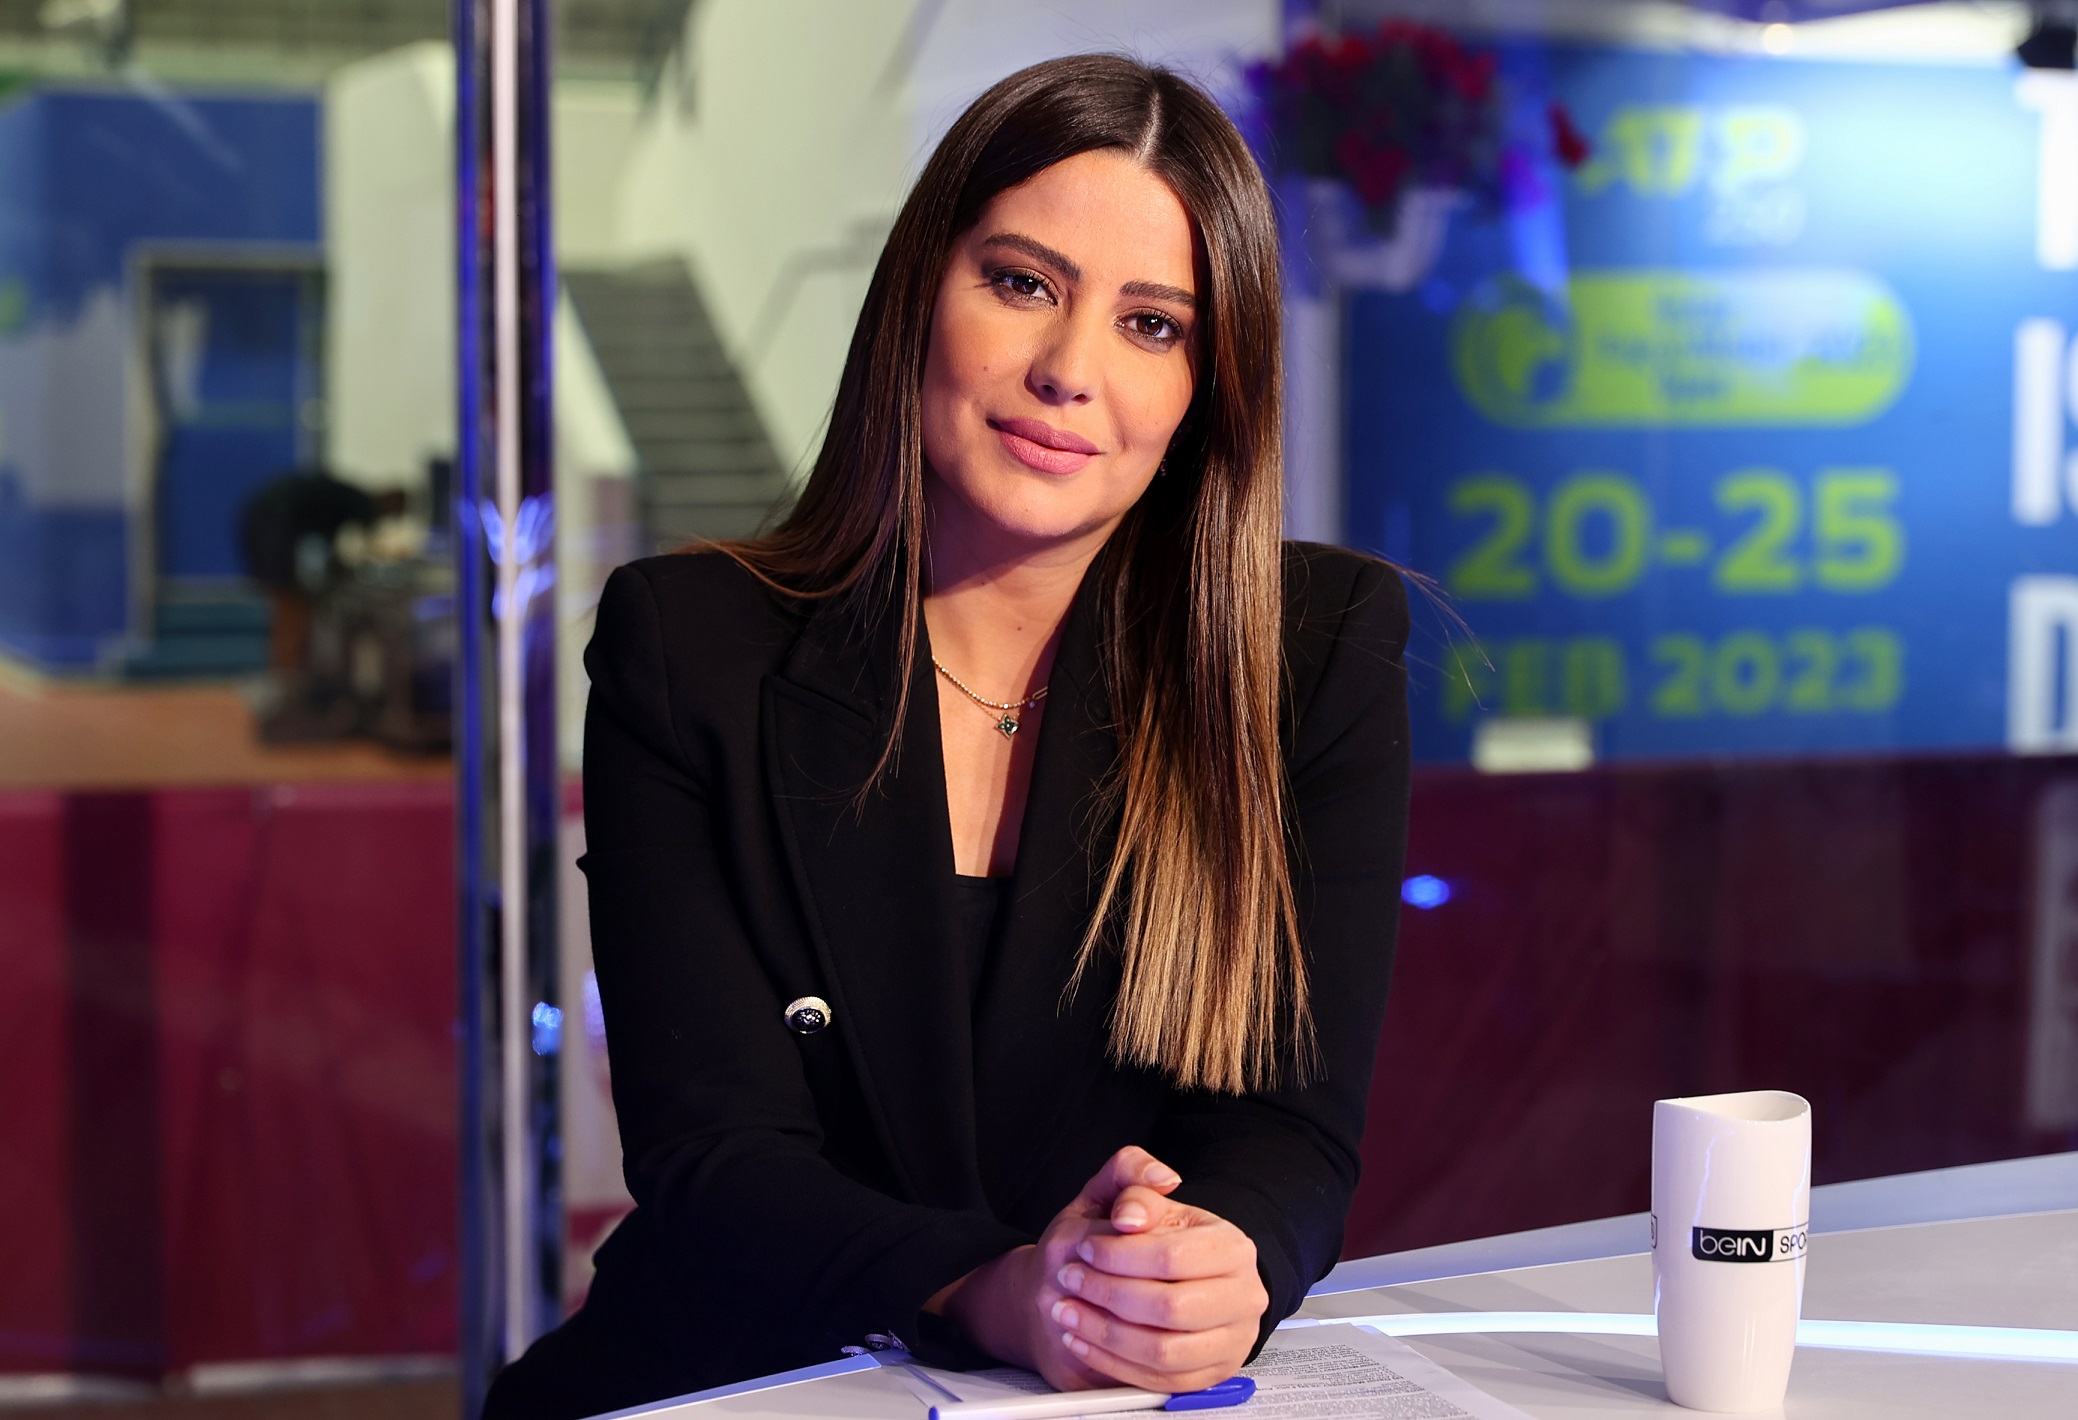 Interview beIN sports journalist Areej Sleem on being the first Arab female presenter to cover *major* tennis tournaments, her next major challenges, and her idol